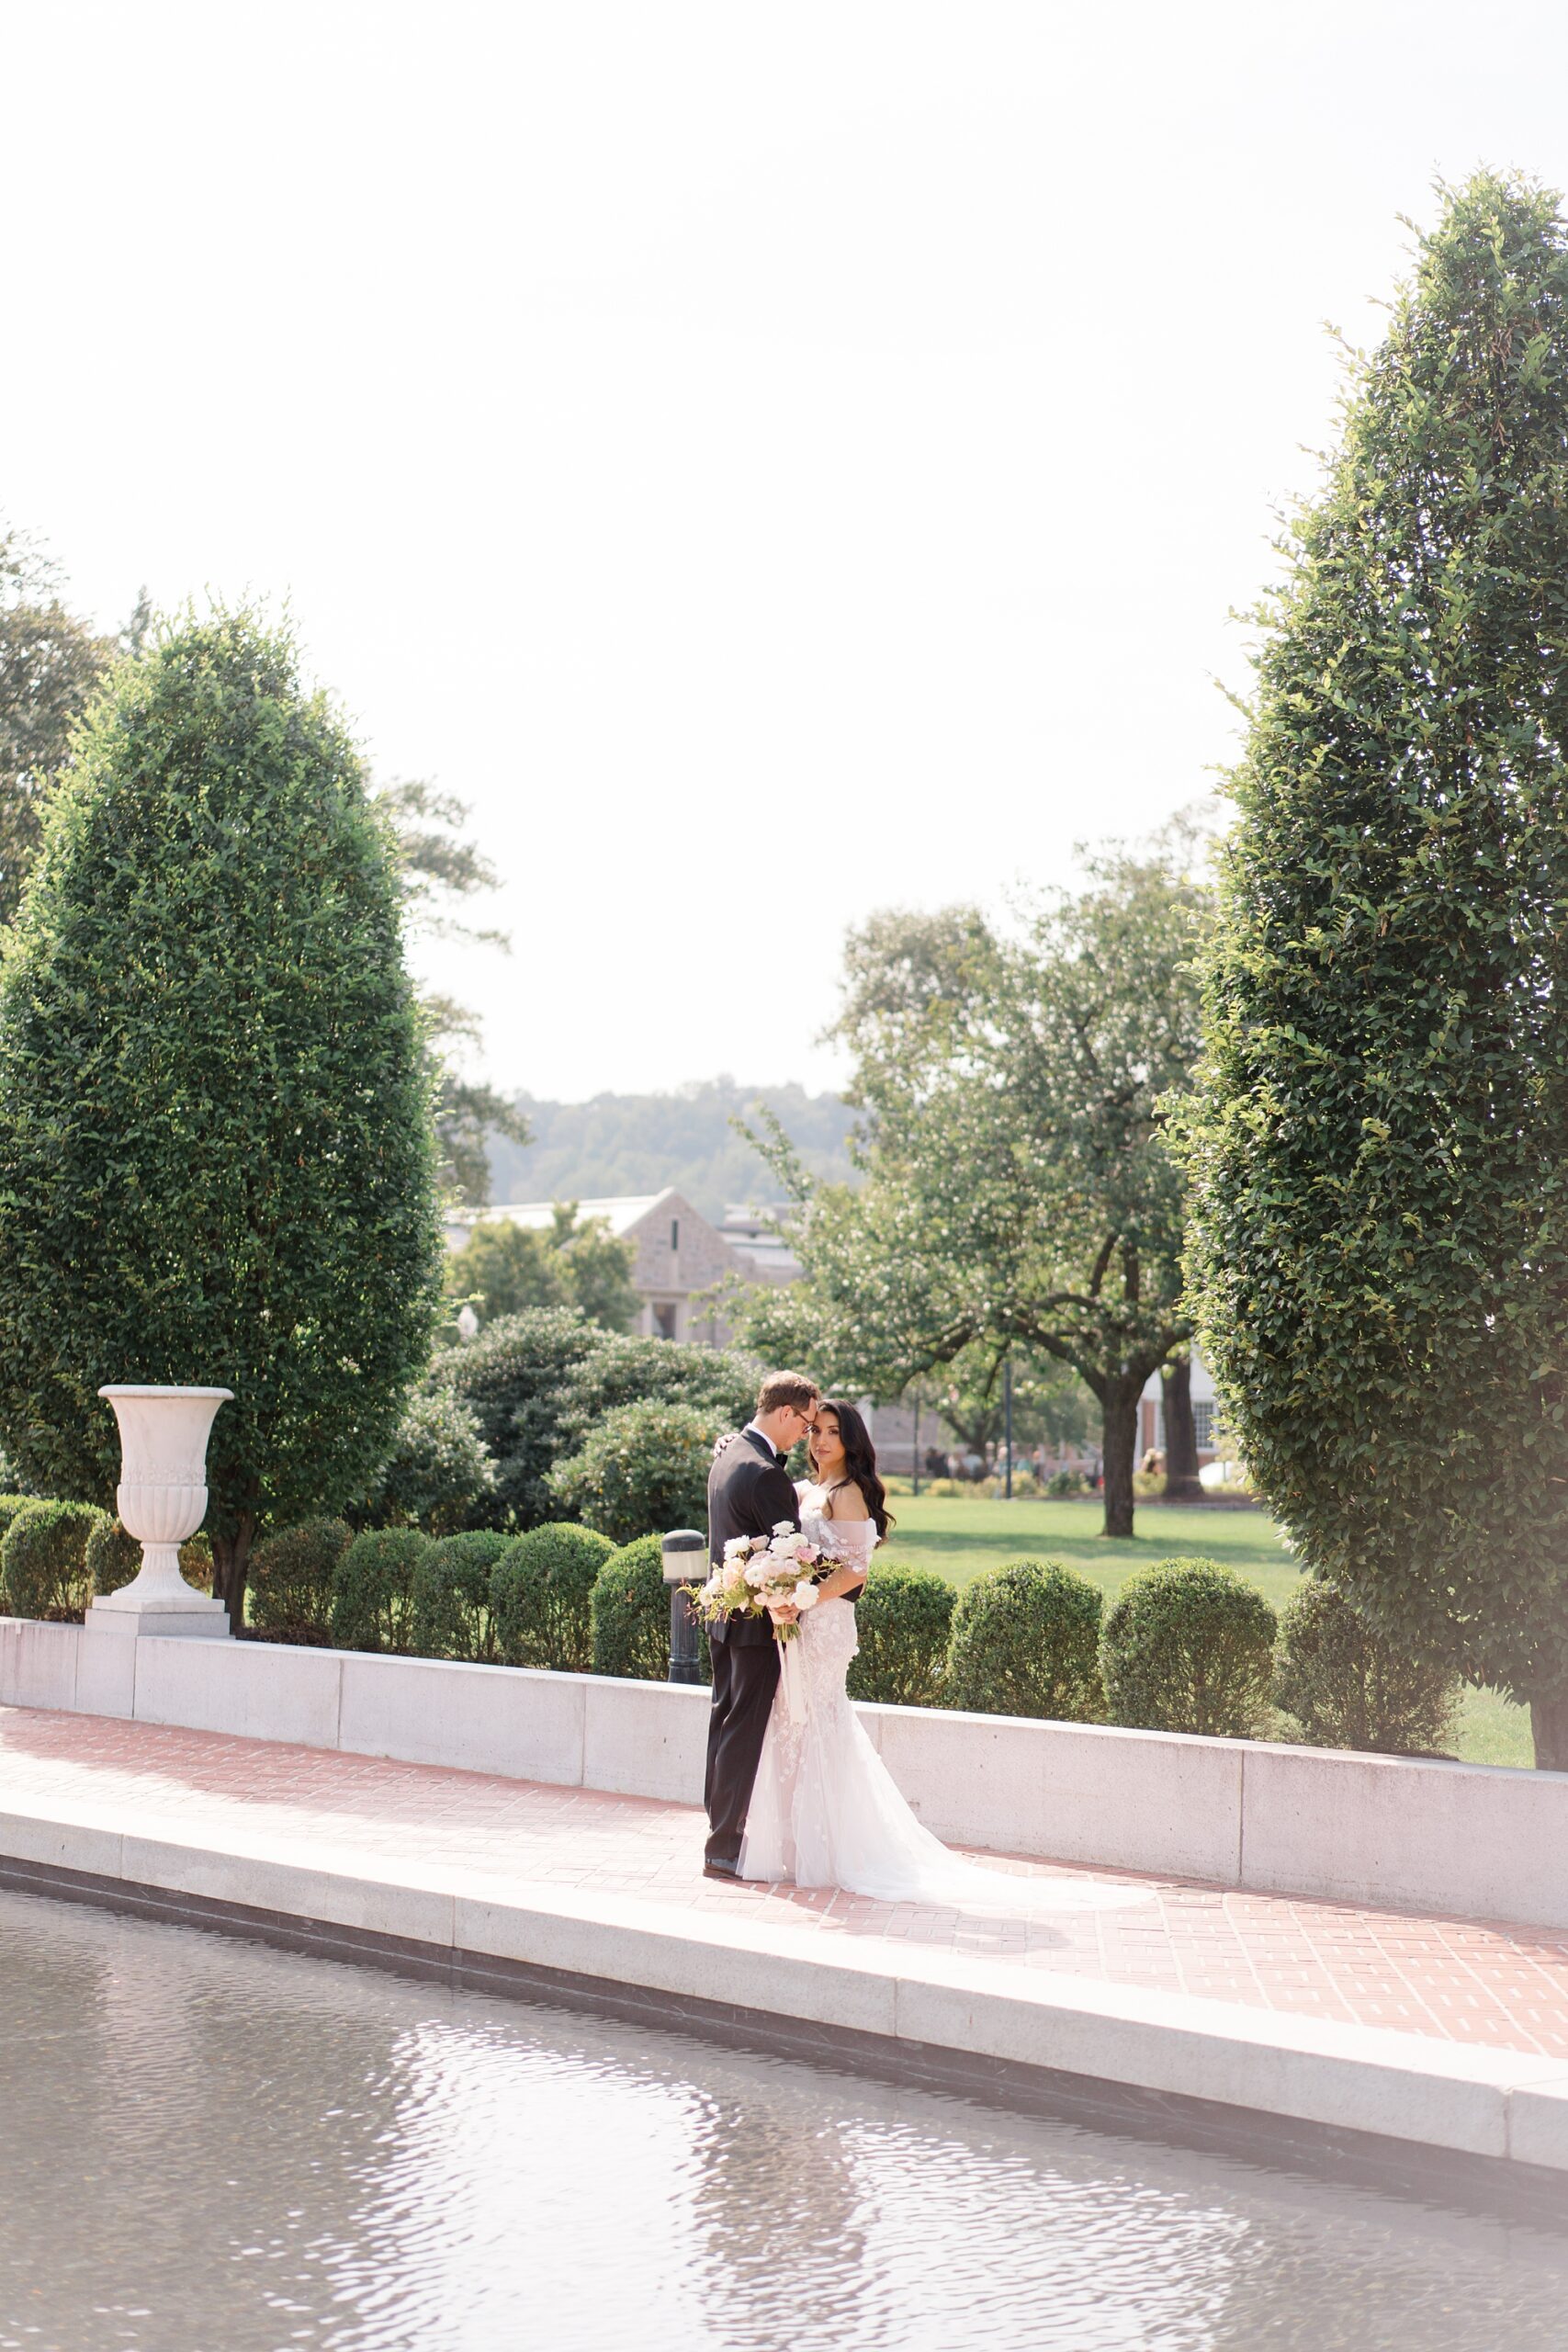 timeless wedding photos by pool and garden